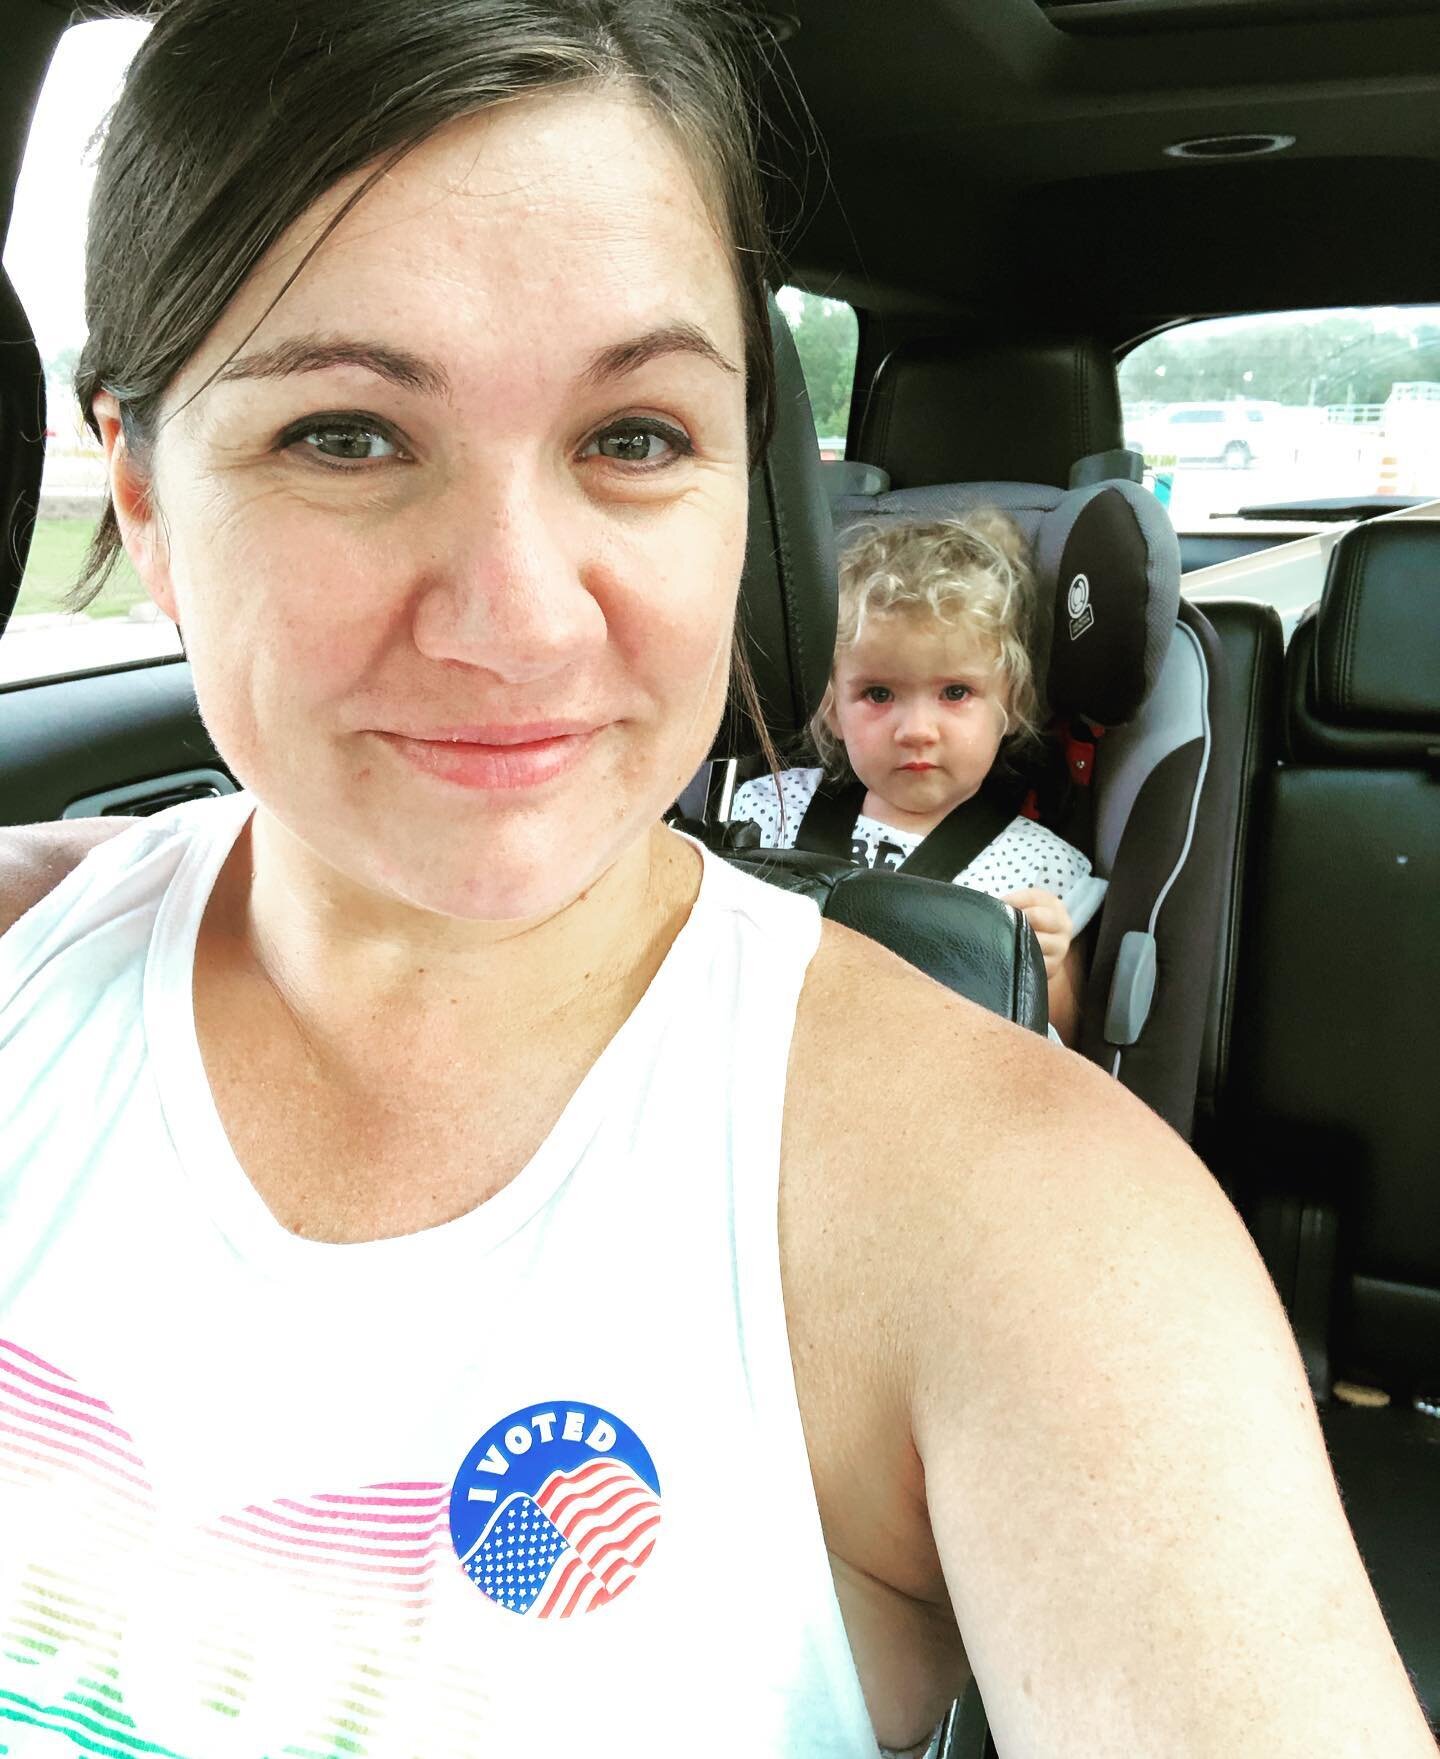 Casted my VOTE early with my sidekick, Evie. She&rsquo;s upset we didn&rsquo;t go to the park first. I voted with her (and all our children) in mind. I voted for unity, hope, truth, and the future in mind. There&rsquo;s so much to be discouraged abou